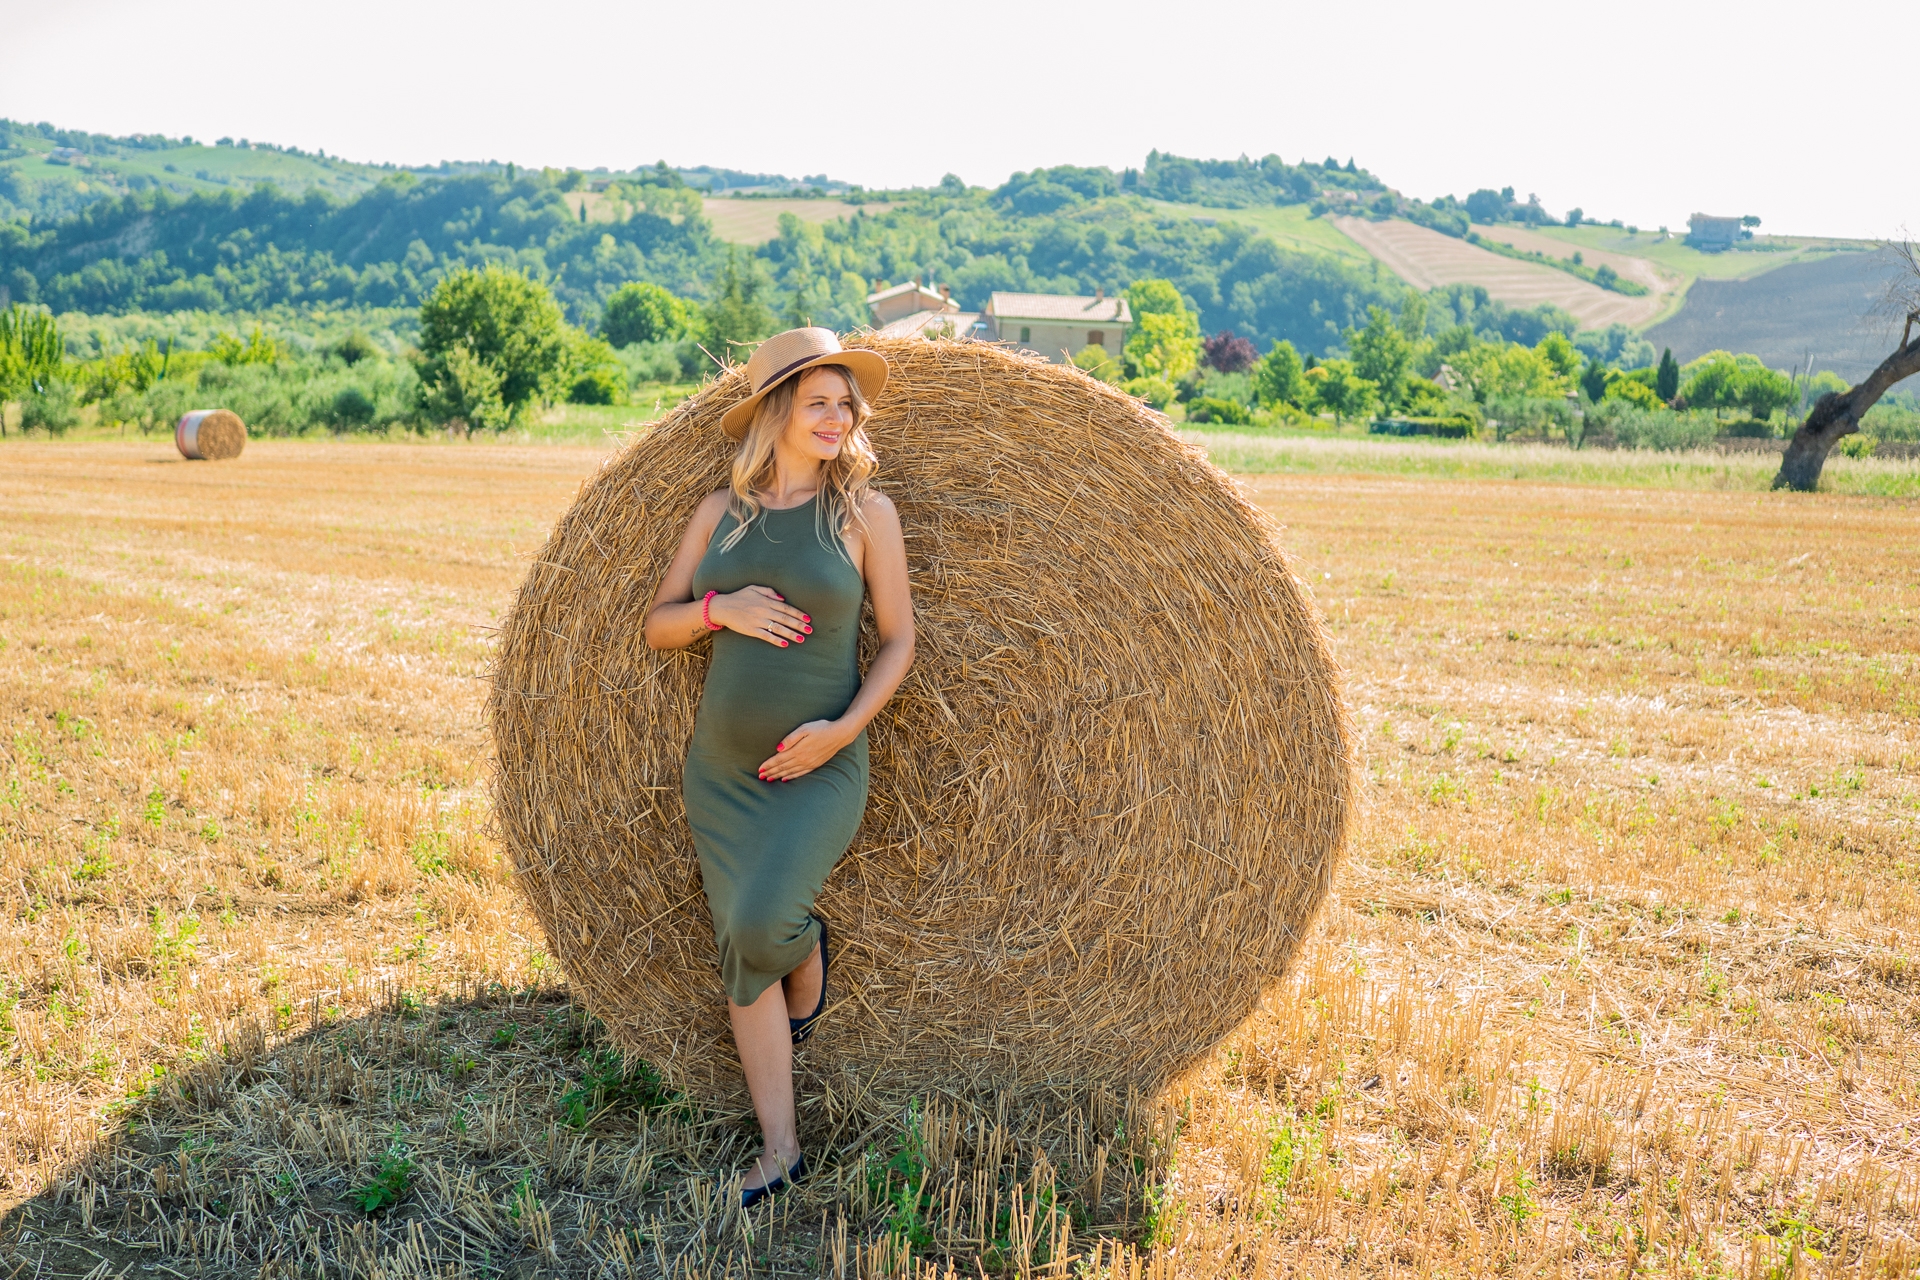 ﻿Pre maternity photoshoot day in Italy with best photographer